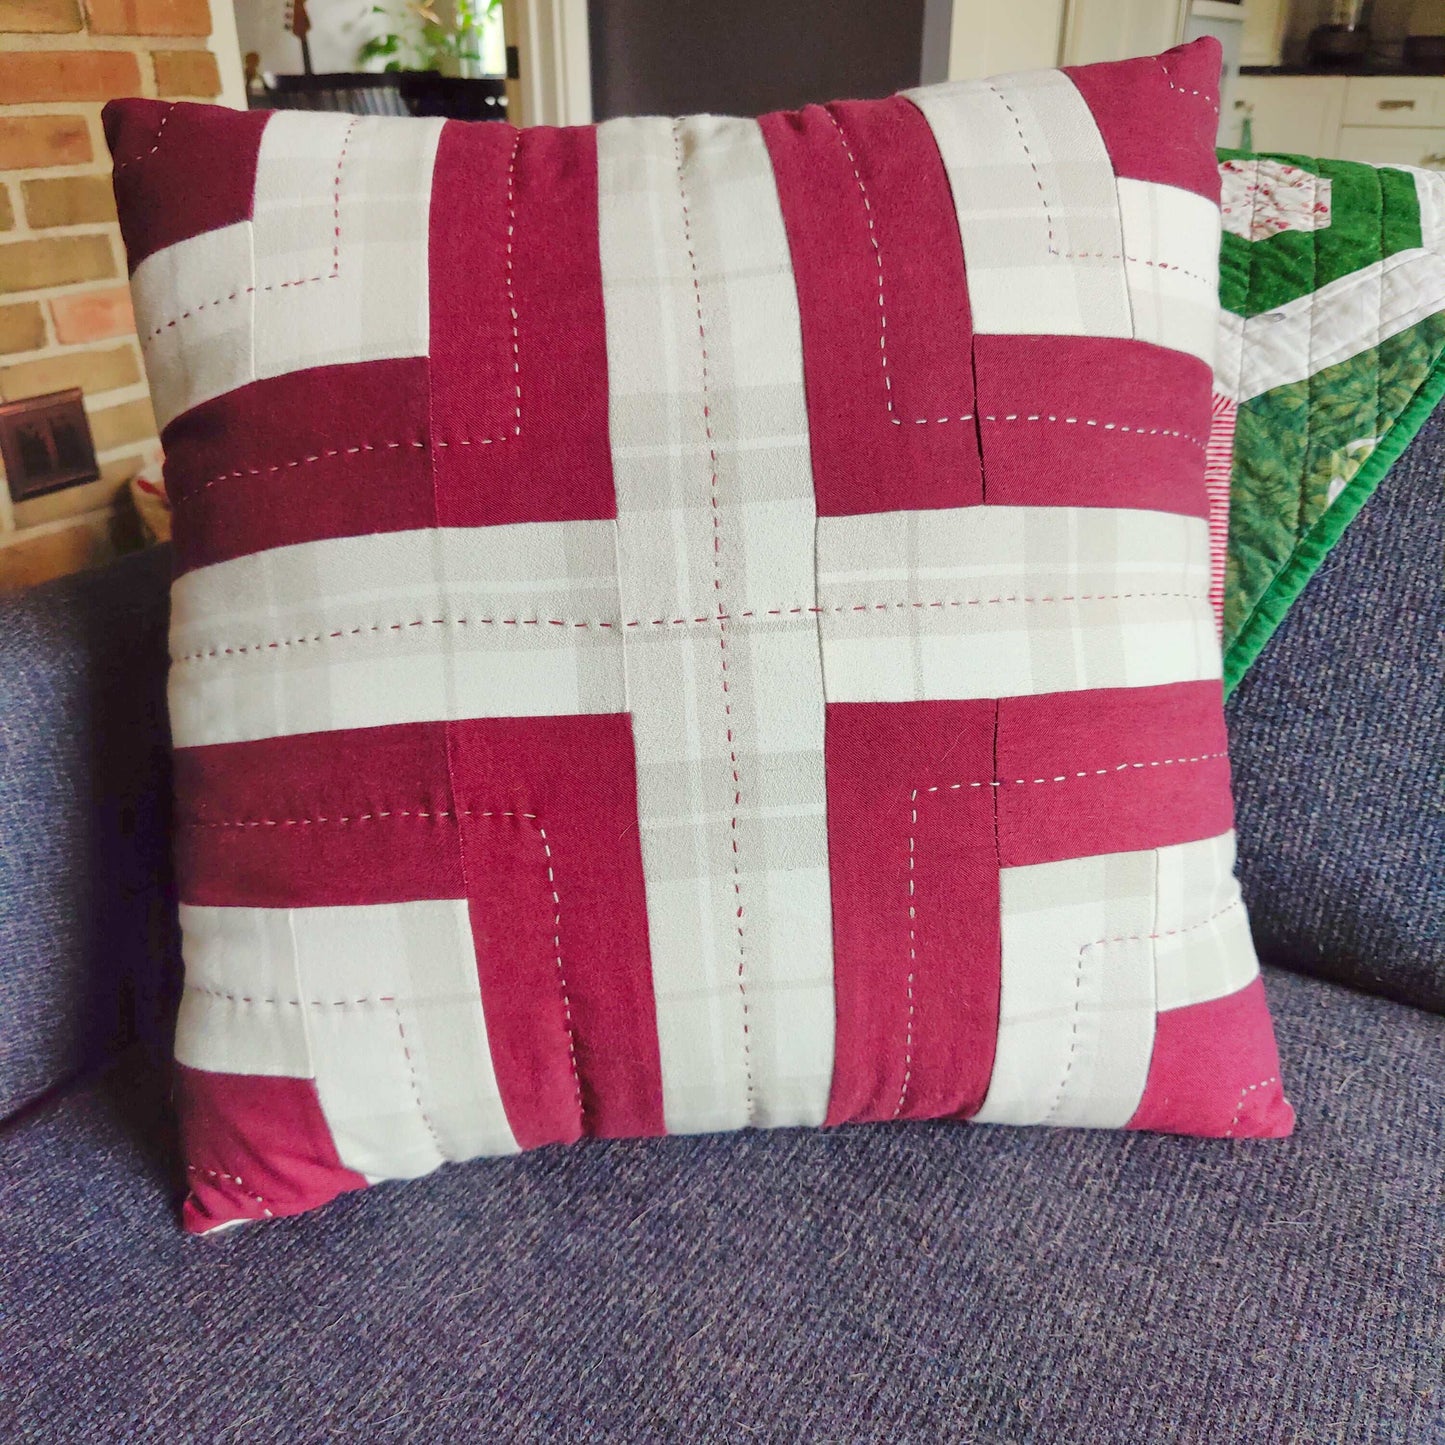 My First Sewing Project - Bundled Pillow Sewing Kit